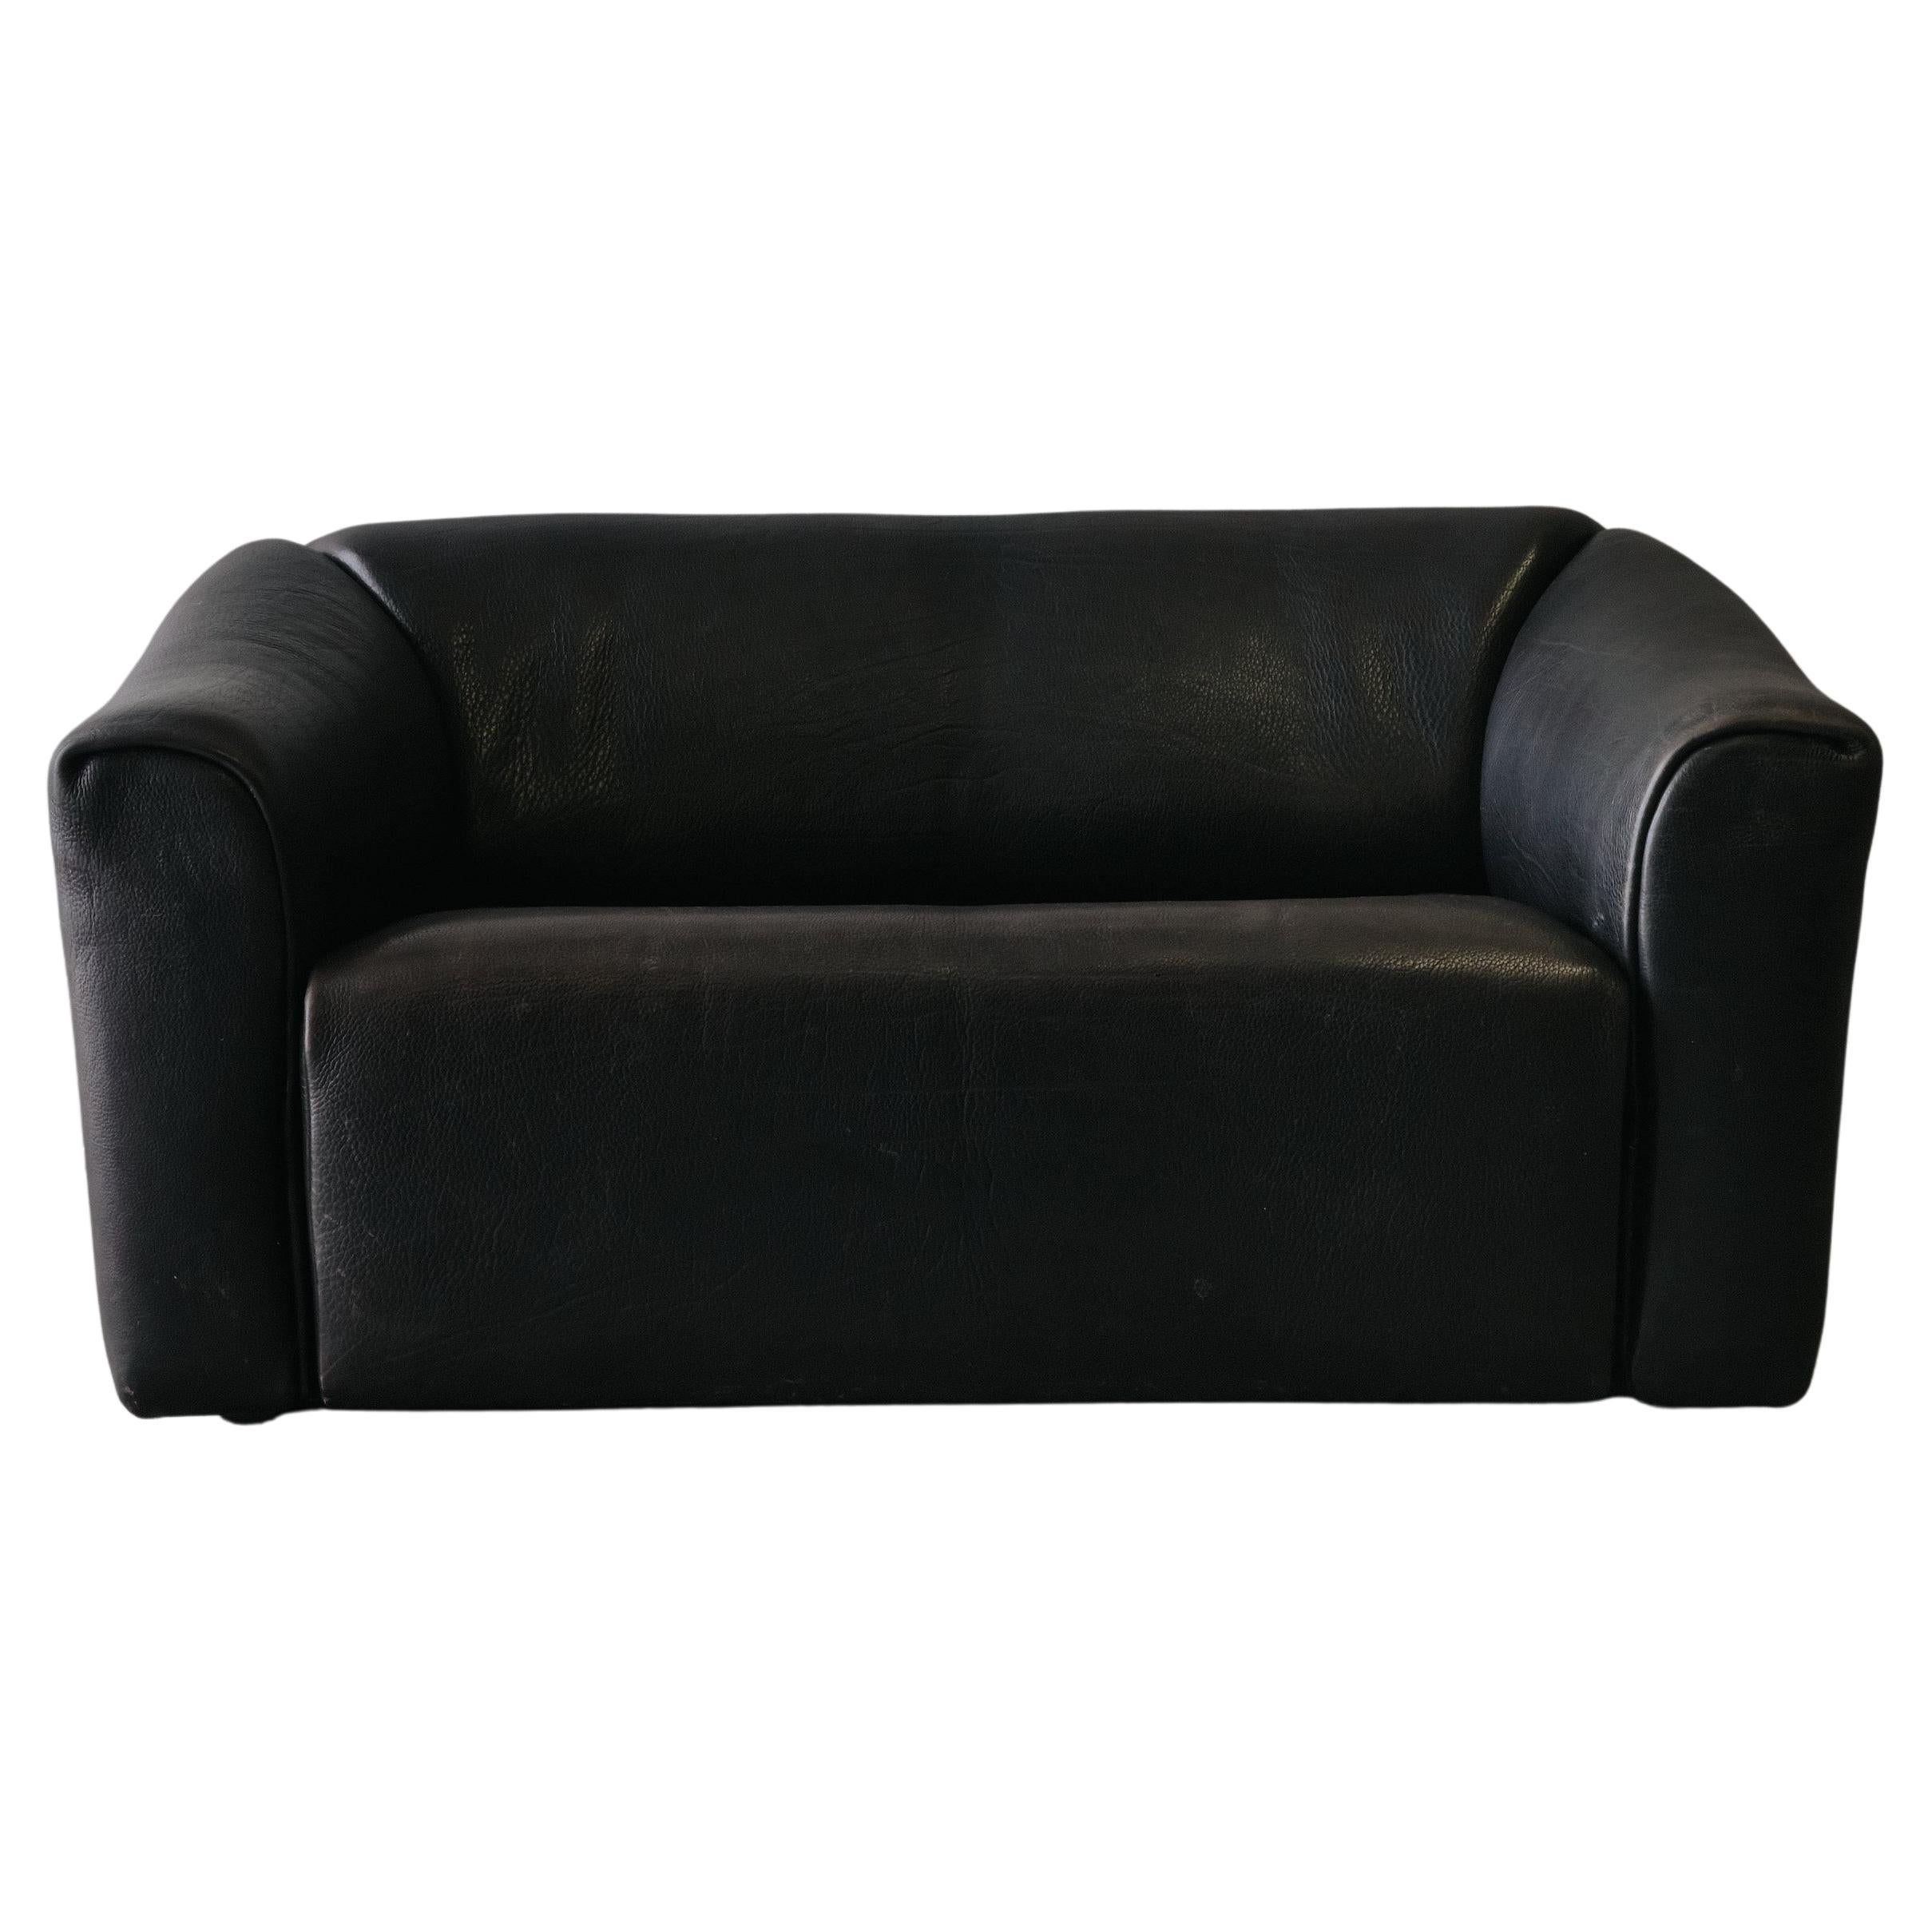 Vintage De Sede DS-47 Sofa In Black Leather, From Switzerland, Circa 1970.  Nice model in original black leather with very light wear and use.  Seat extends 6